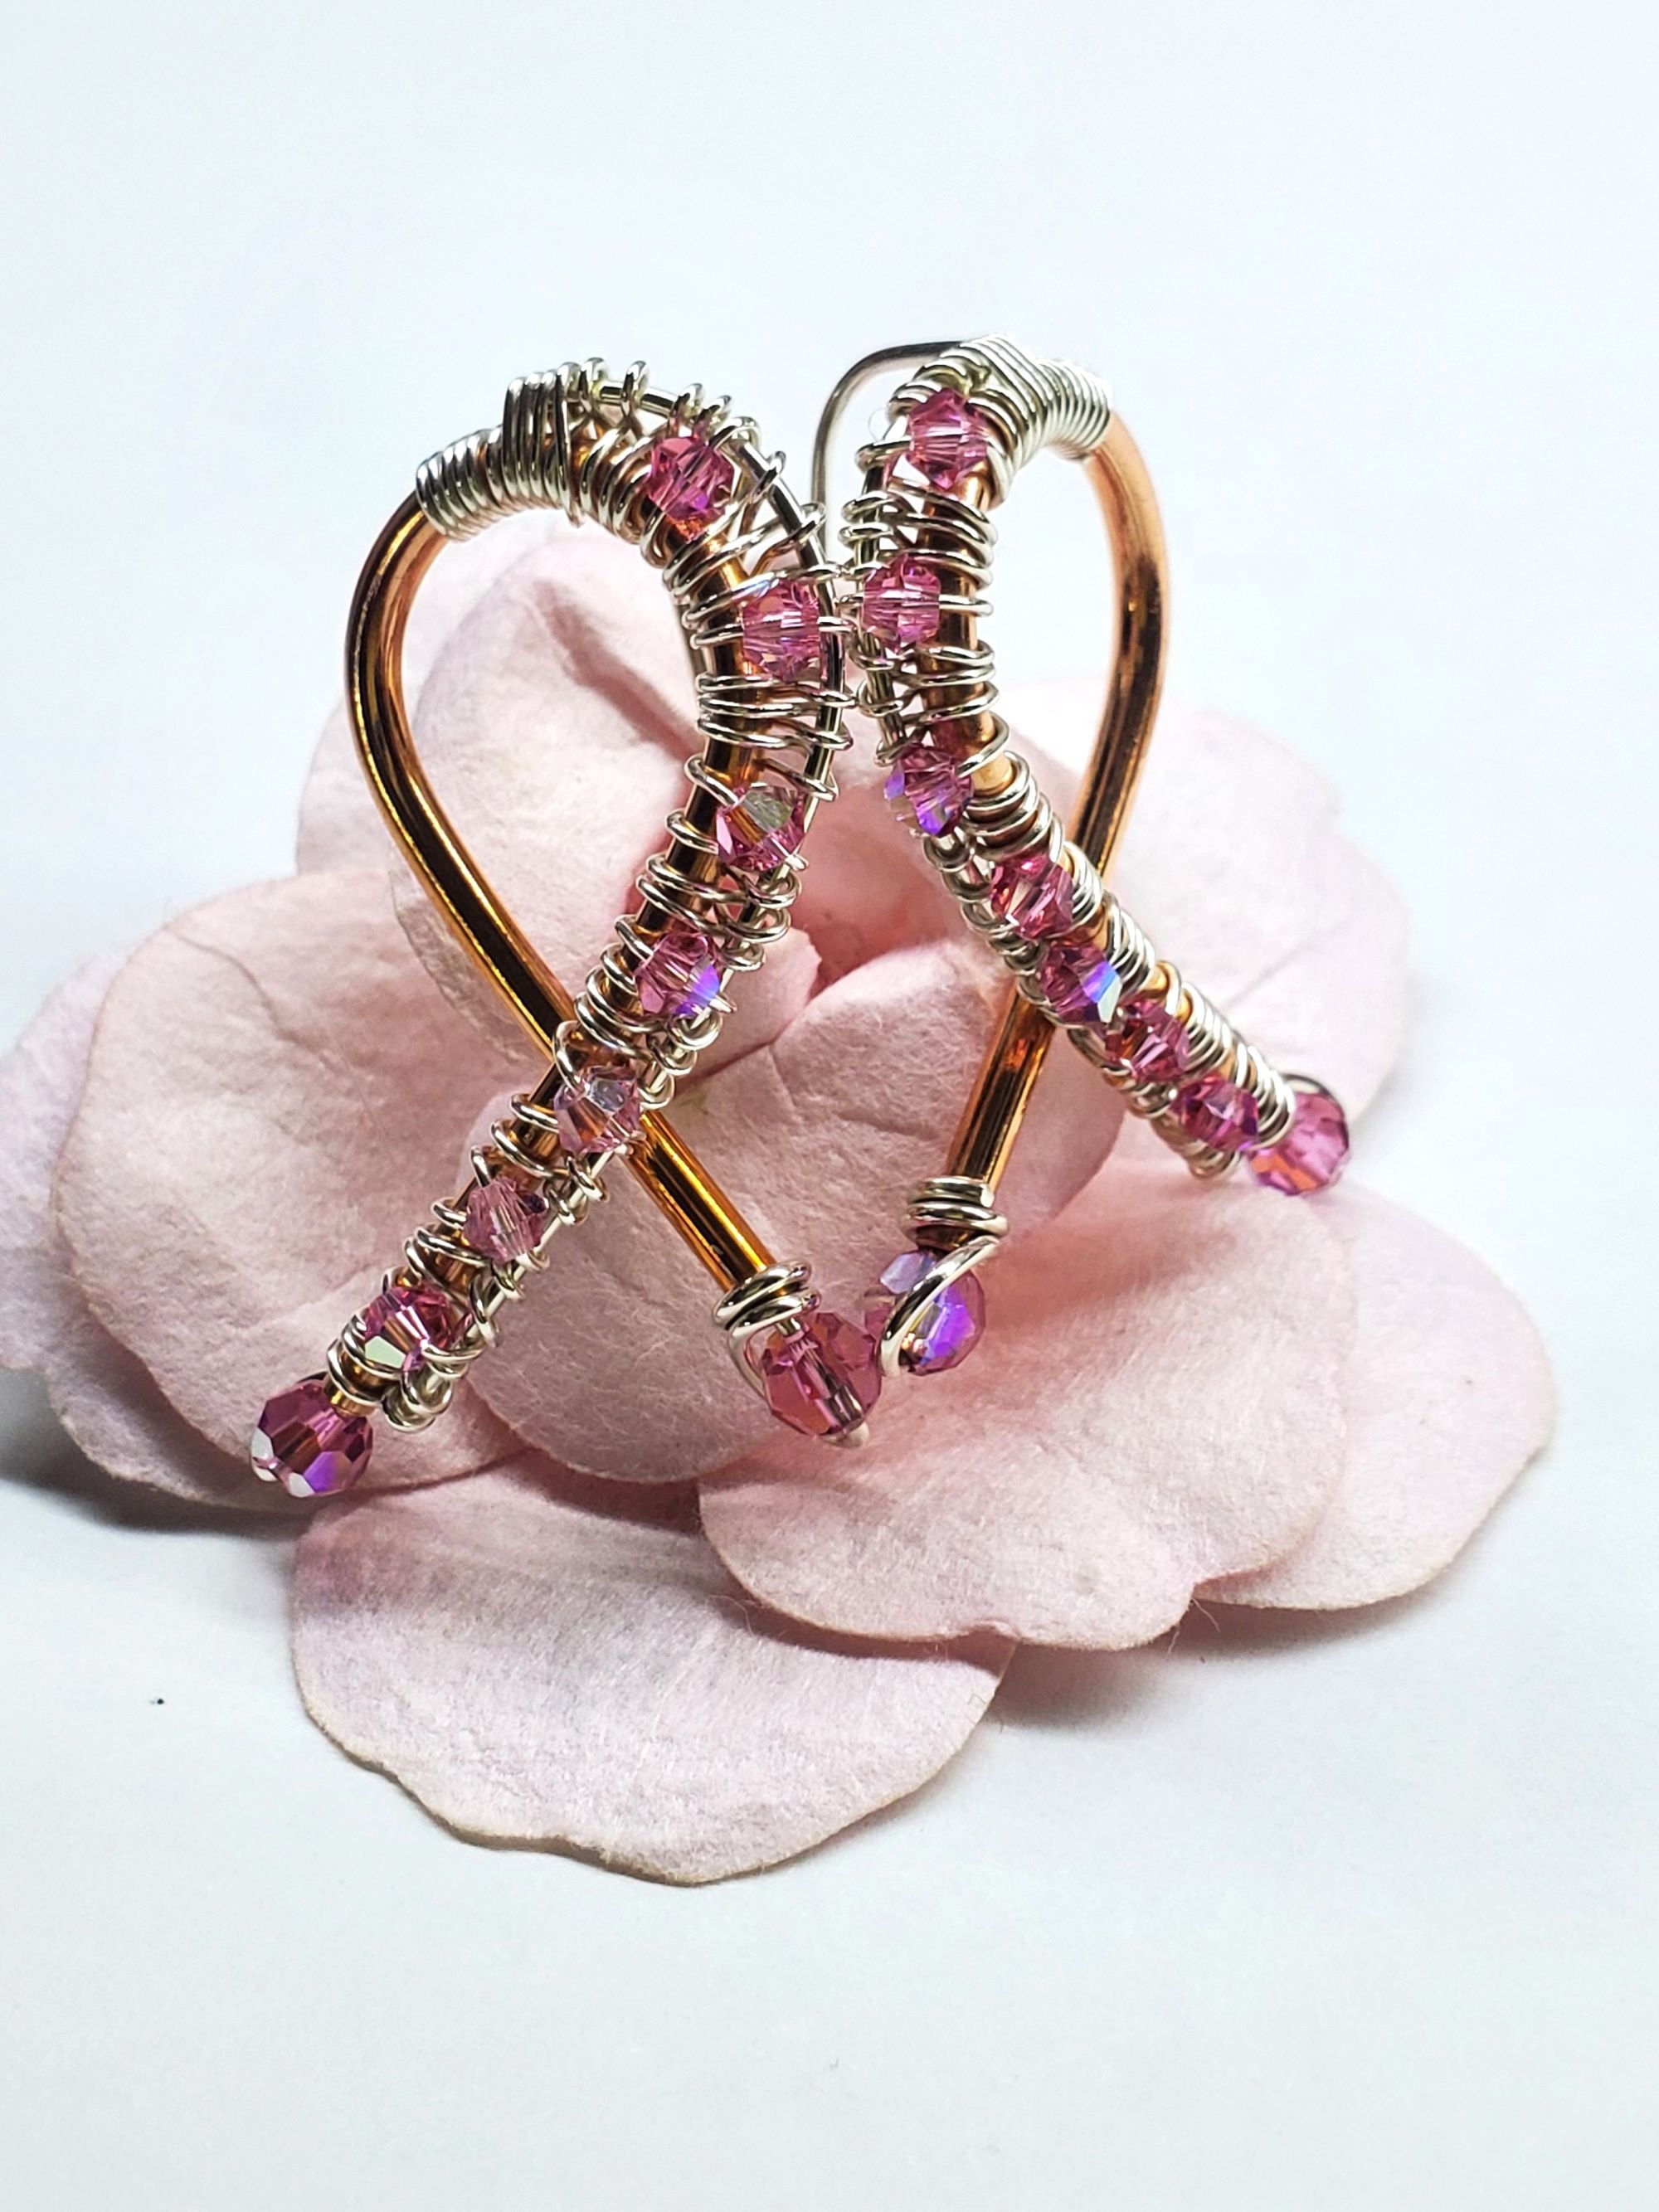 Wired Pink Breast Cancer Awareness Bow (2.5